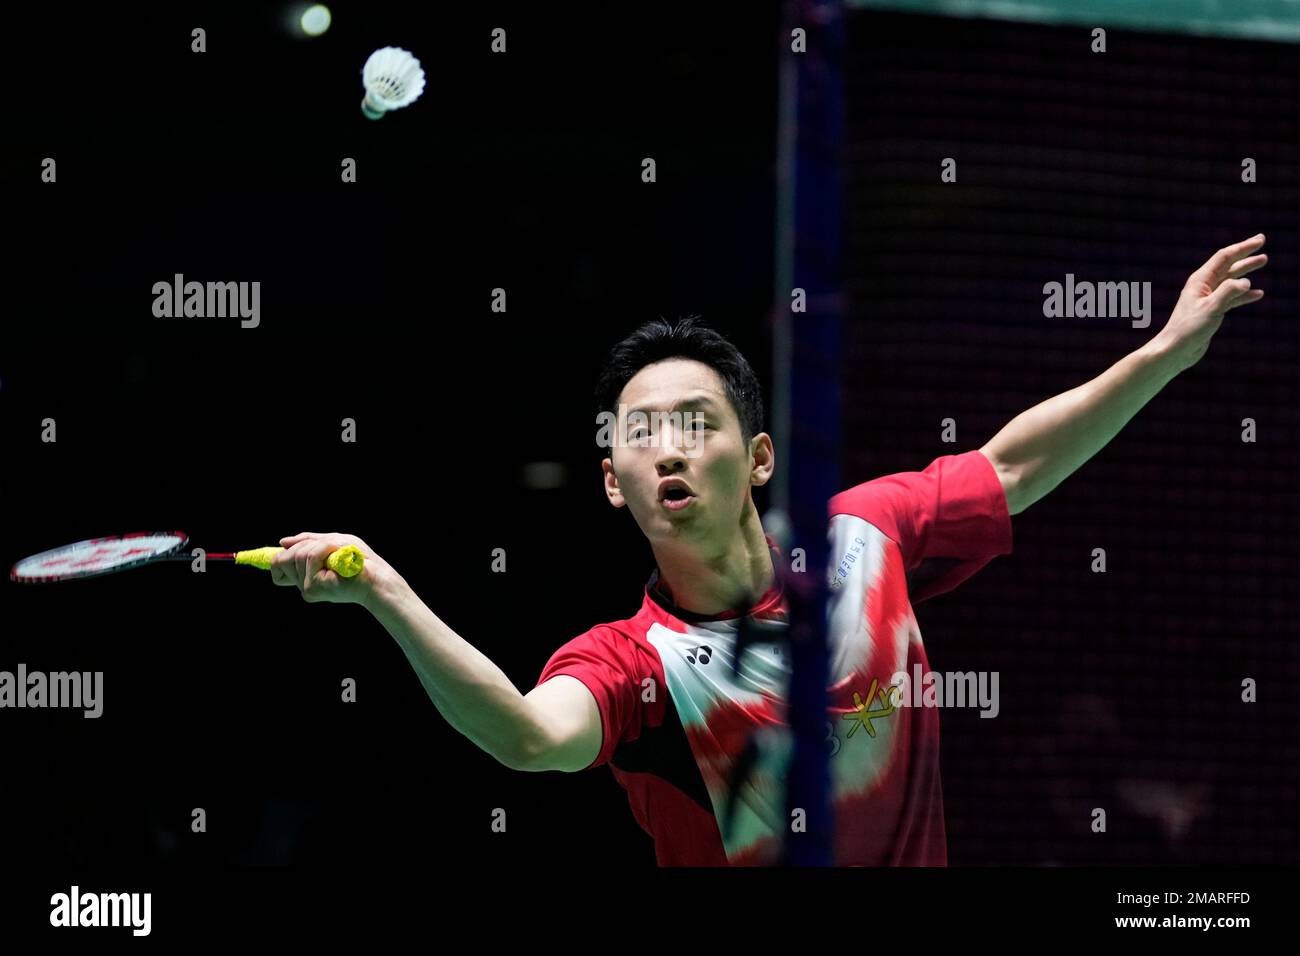 Choi Sol-gyu of South Korea, with Shin Seung-chan, plays a return during a badminton game of the mixed doubles against Dechapol Puavaranukroh and Sapsiree Taerattanachai of Thailand in the BWF World Championships